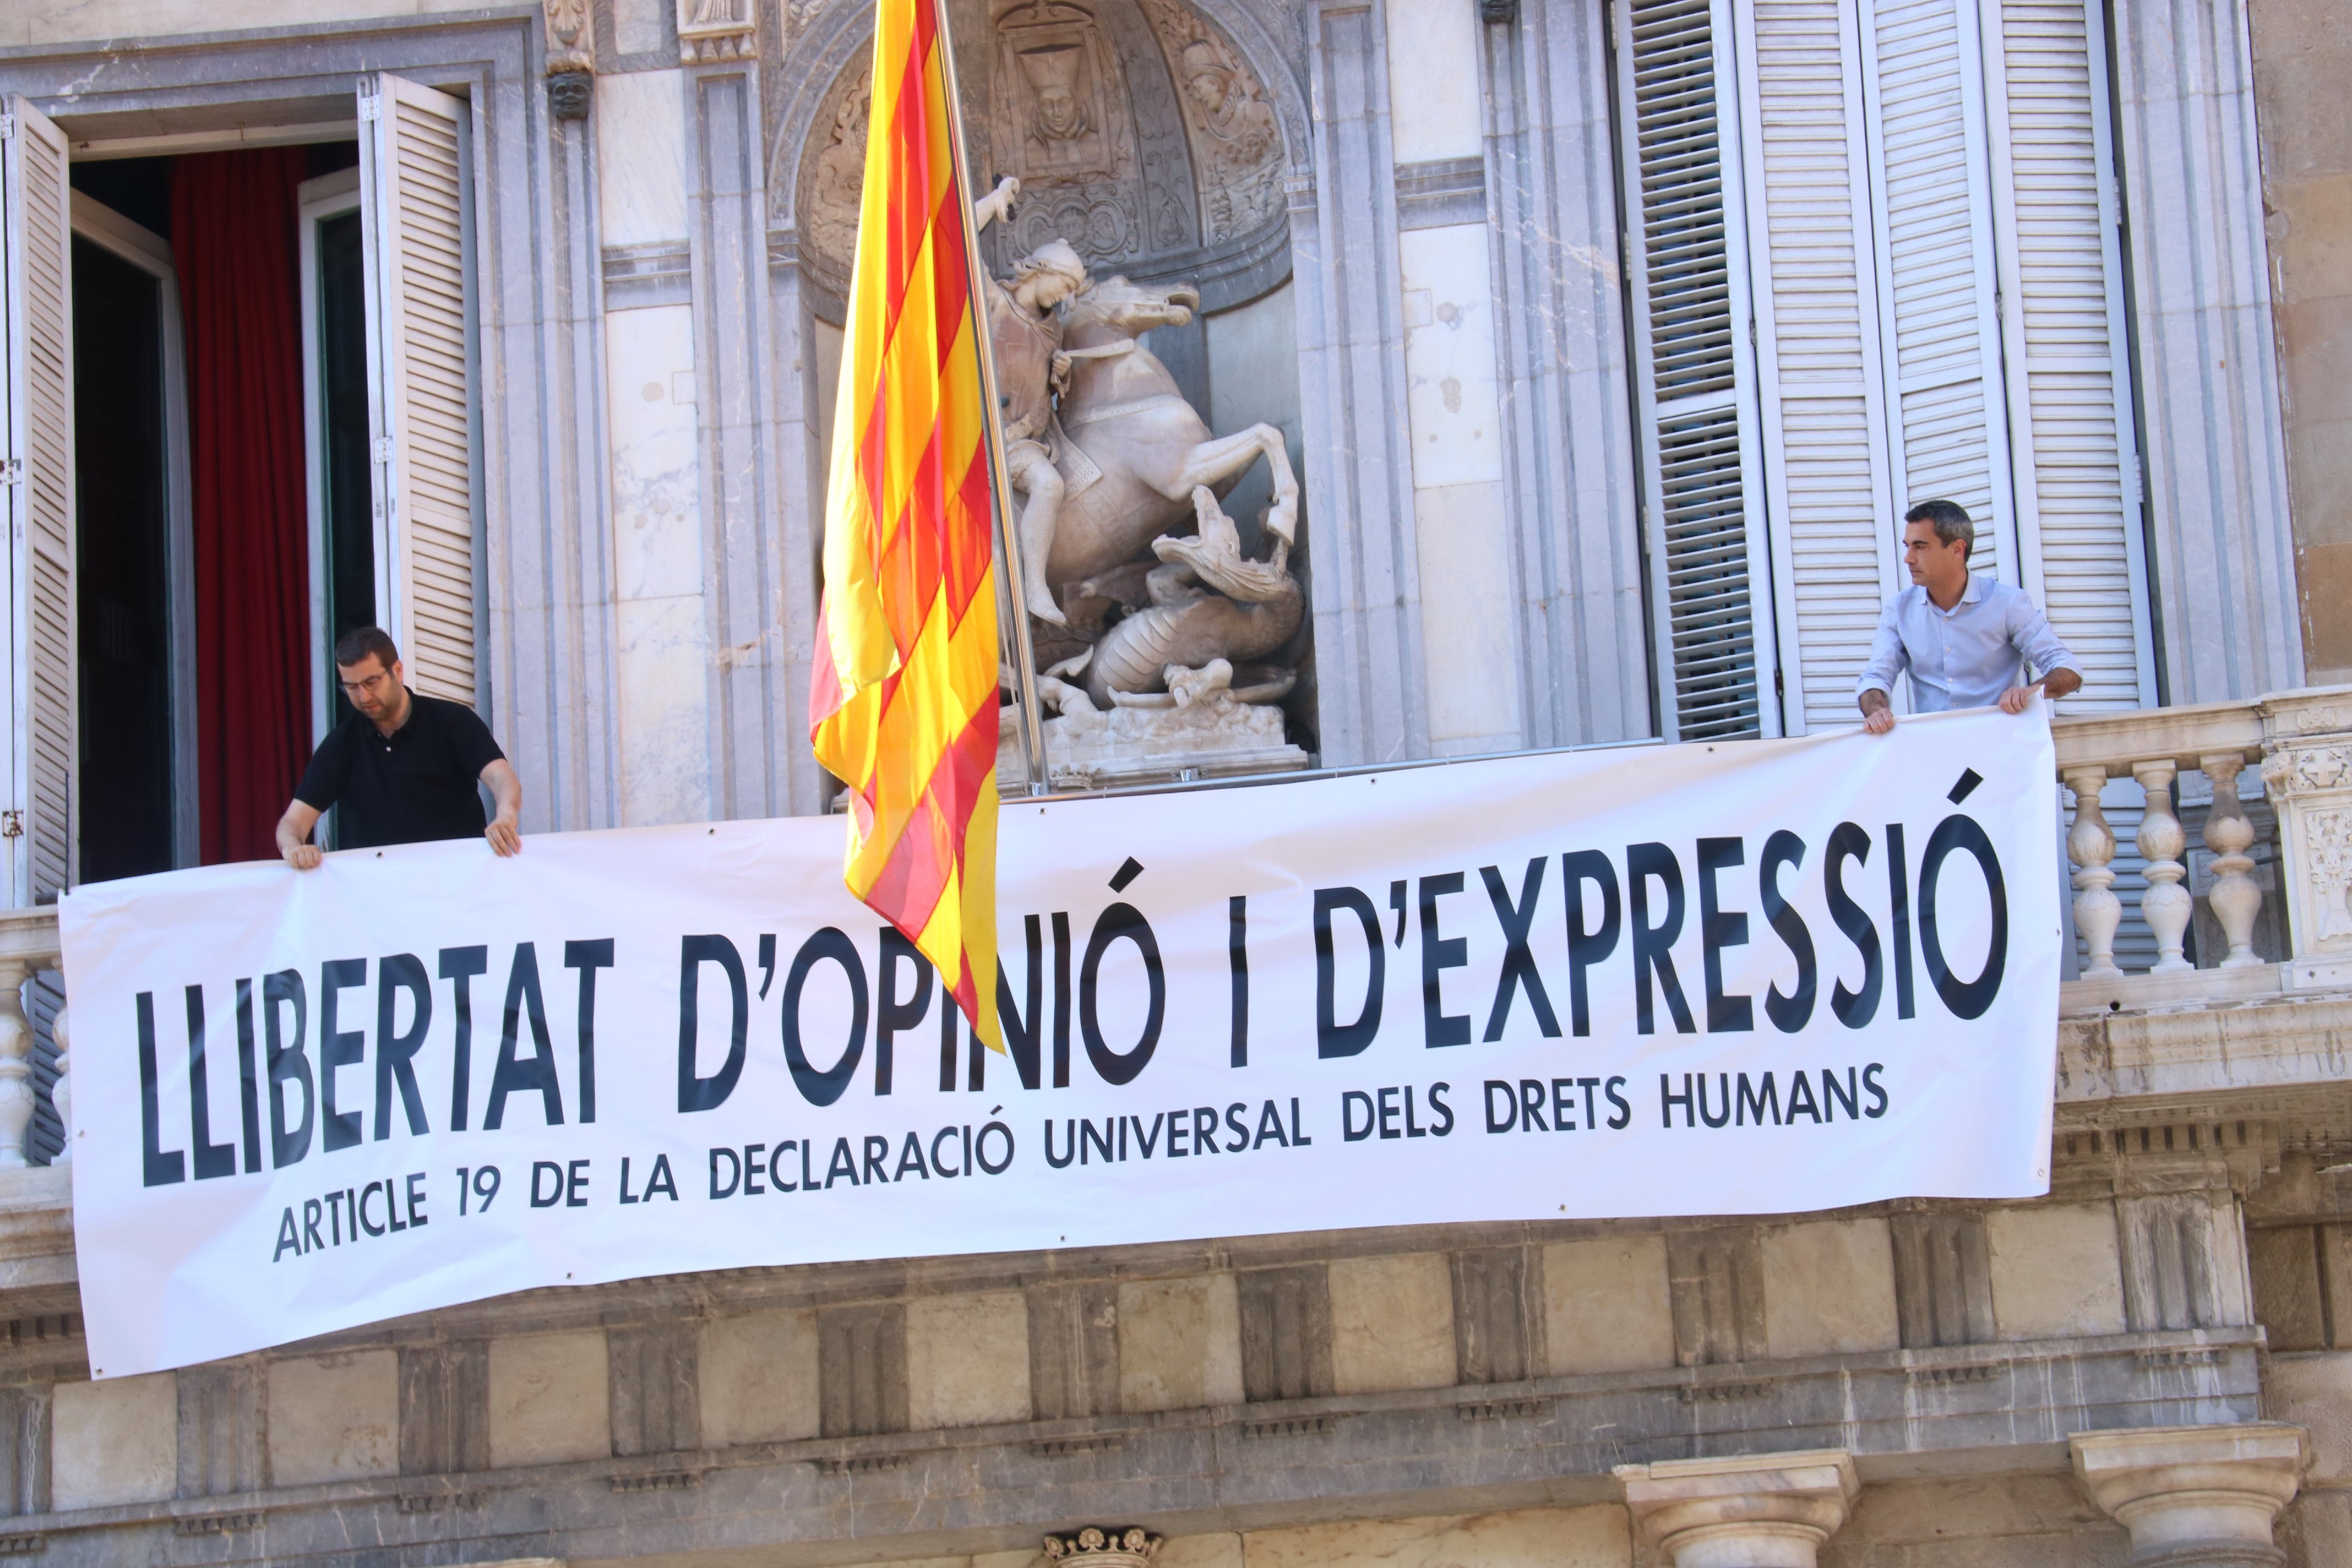 Torra responds to disobedience investigation with another banner: "Freedom of expression"